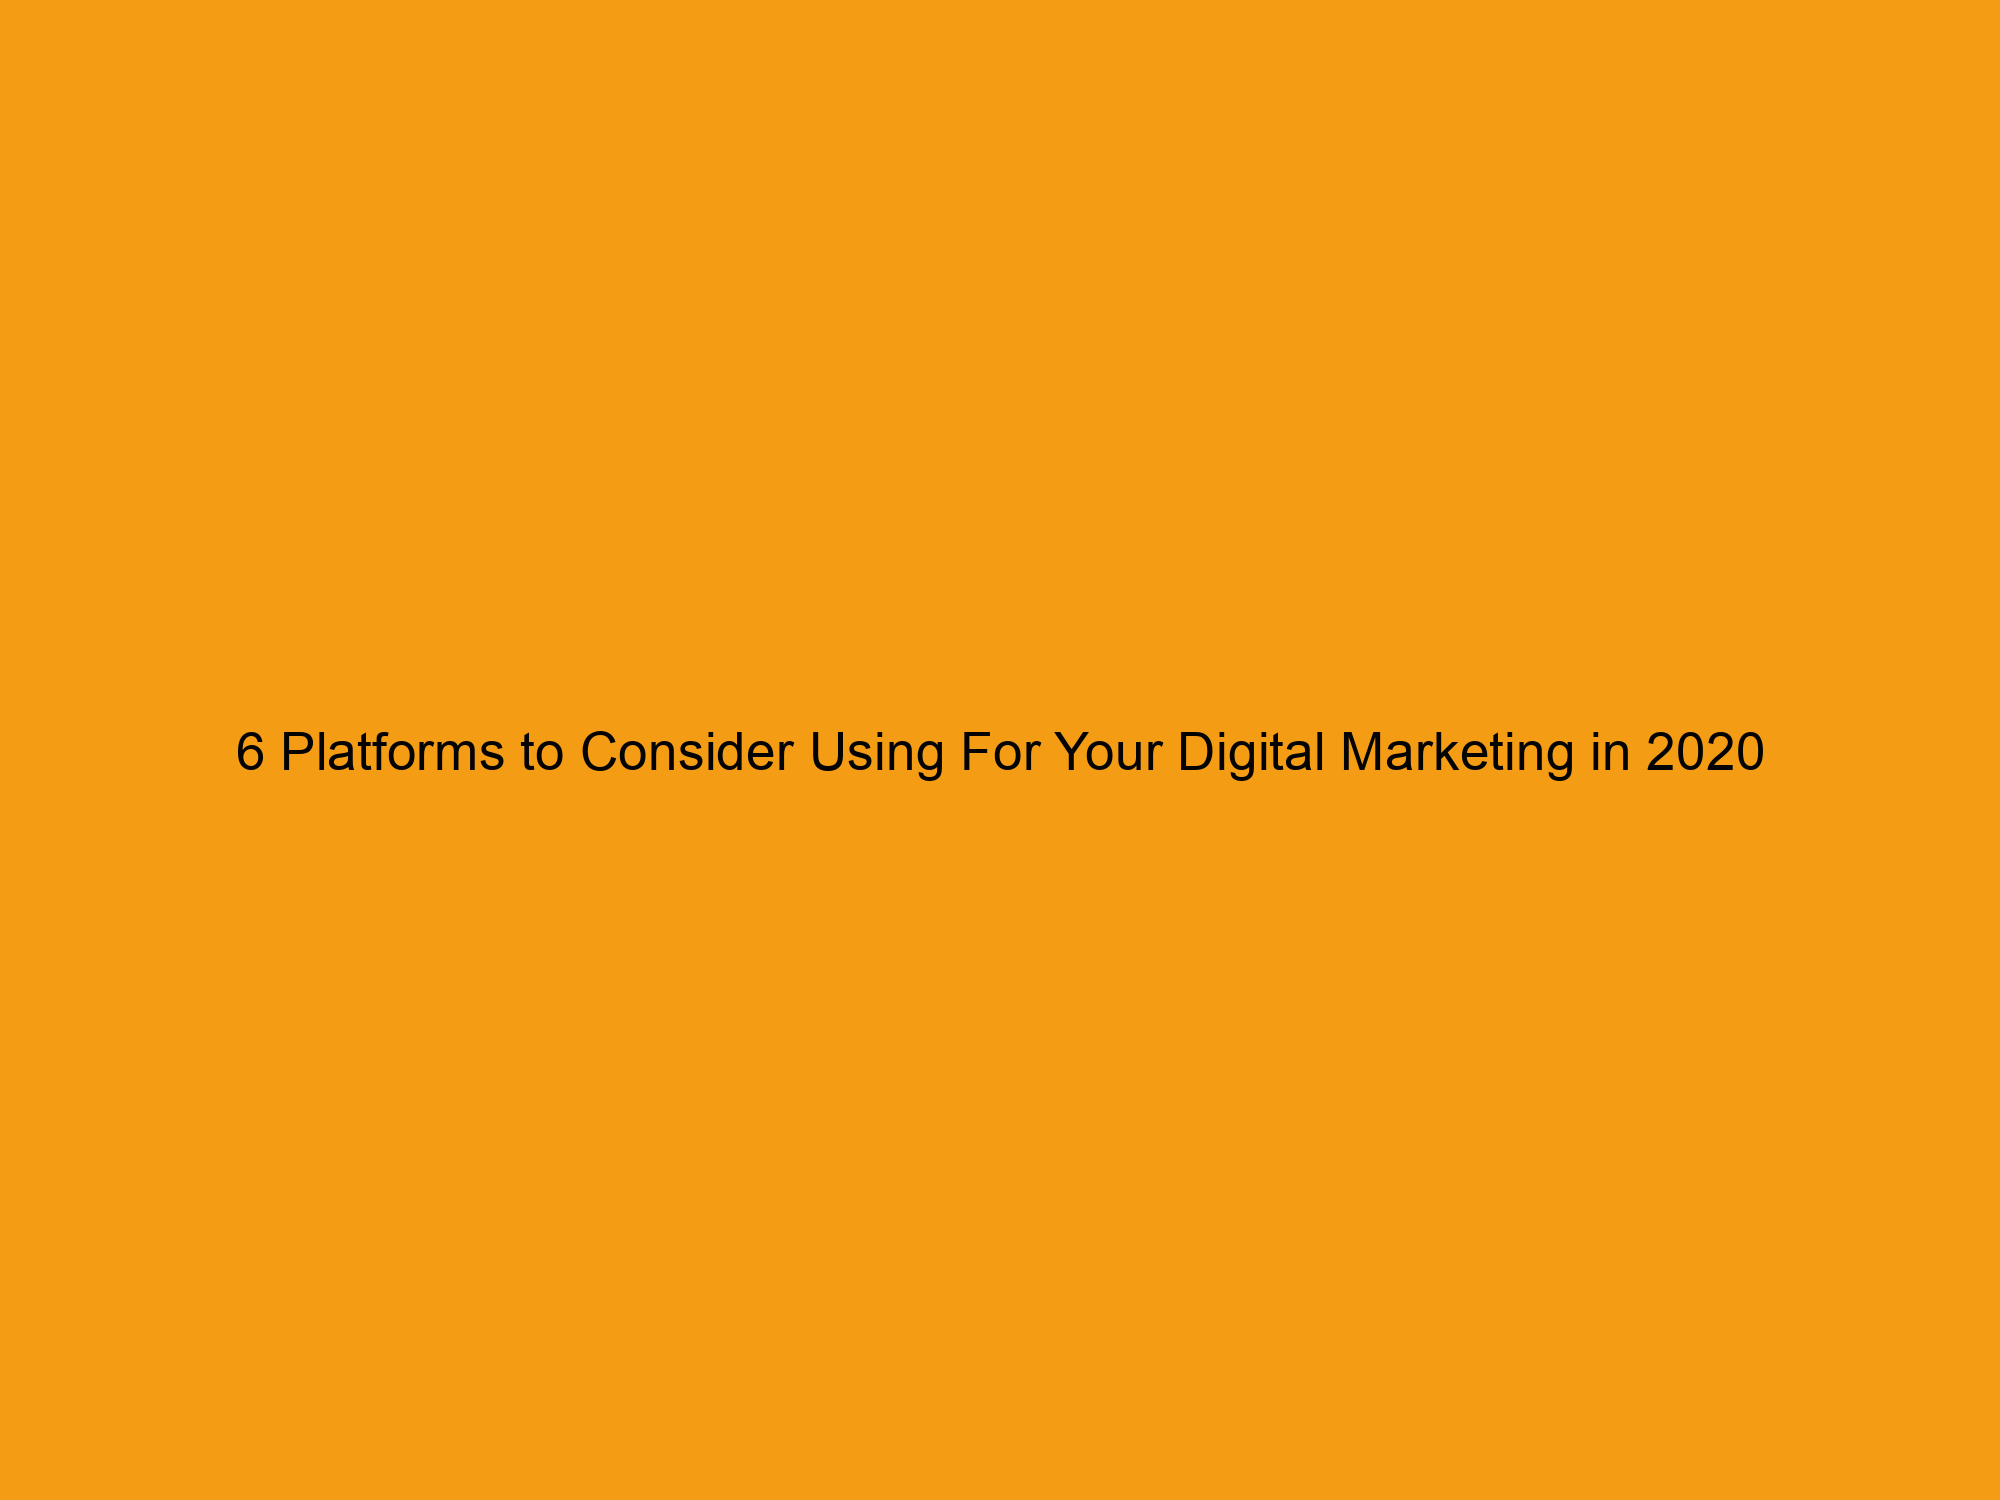 6 Platforms to Consider Using For Your Digital Marketing in 2020